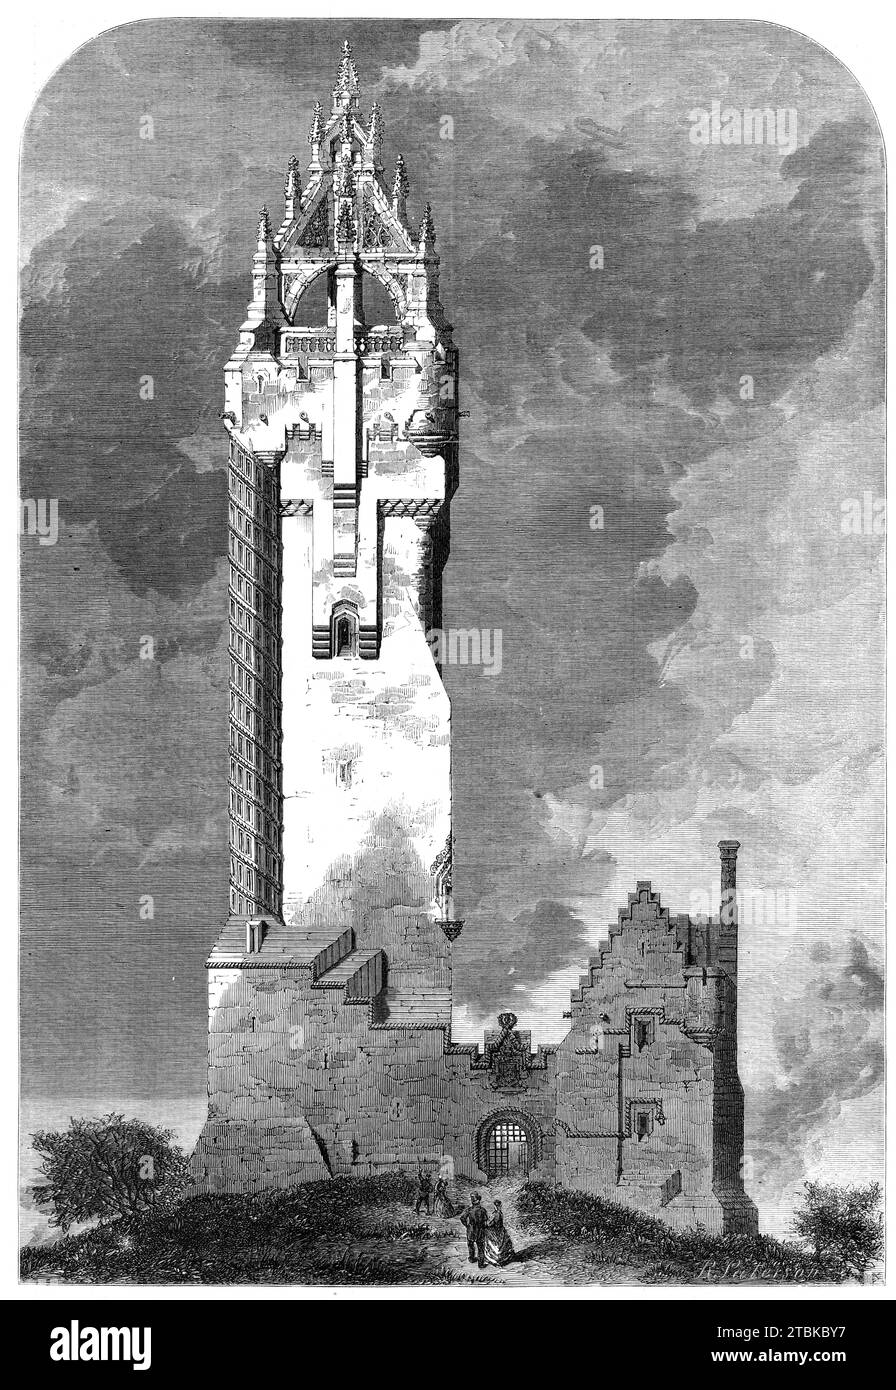 The National Wallace Monument, about to be built on the Abbey Craig, near Stirling, 1861. 'The monument...consists of a Scottish Baronial Tower, upwards of 200 feet high and 36 feet square, having walls of a thick and massive construction of not less than 15 feet thick at the base, and graduating from 5 to 6 feet at the top...The apex of the monument exhibits the form of an Imperial open crown of stone...which cannot fail to present a most commanding outline and graceful feature when seen against the open sky. The coronal top or crown is upwards of fifty feet high, and consists of eight arms.. Stock Photo